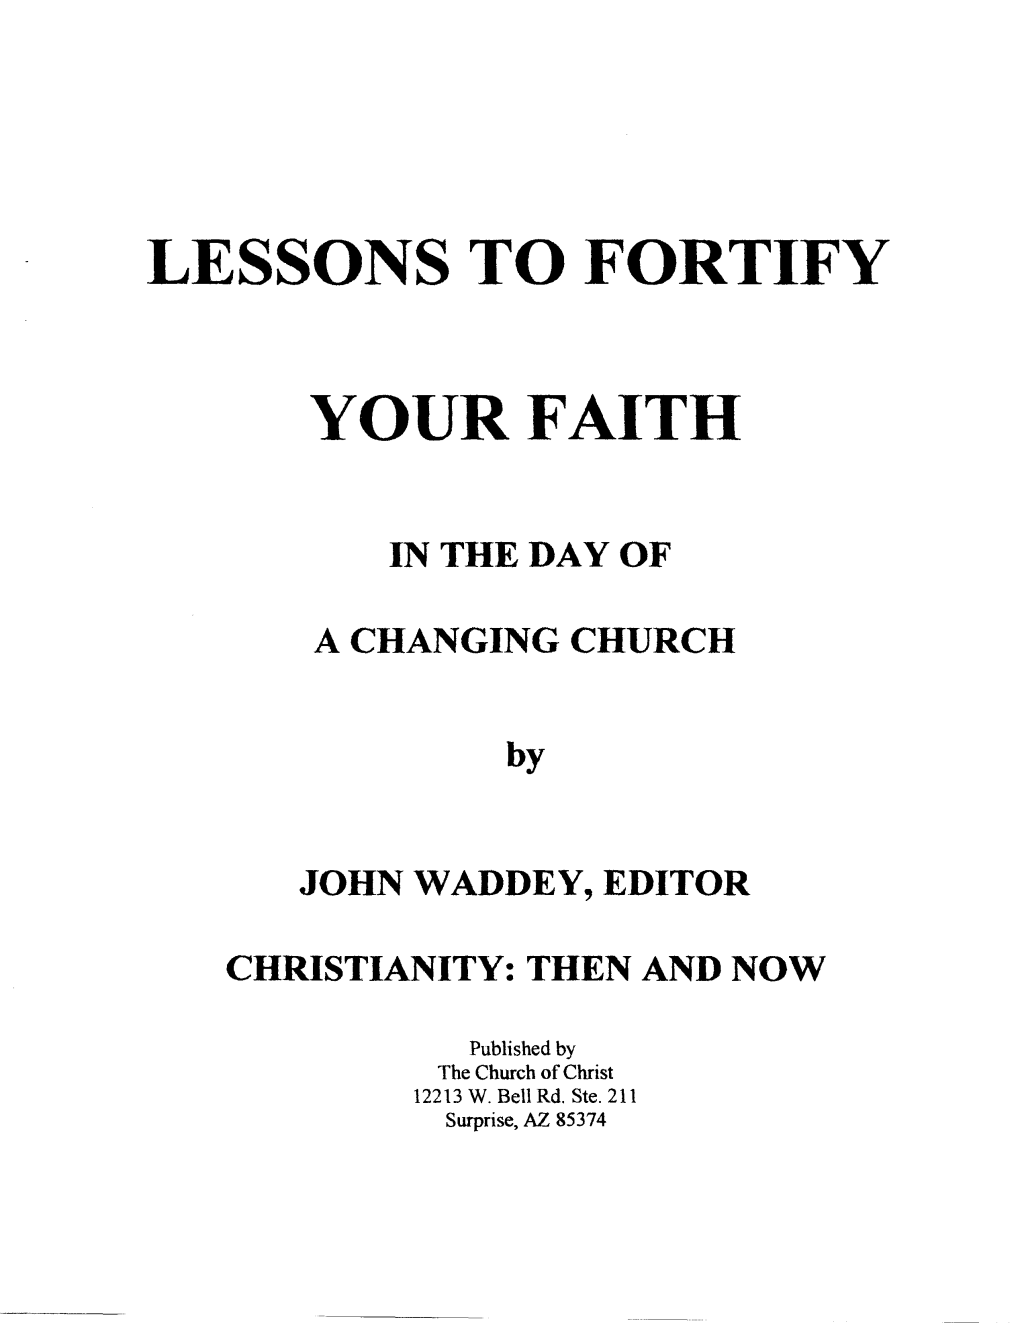 Lessons to Fortify Your Faith." These Are Prepared by John Waddey, Minister of the West Bell Road Church